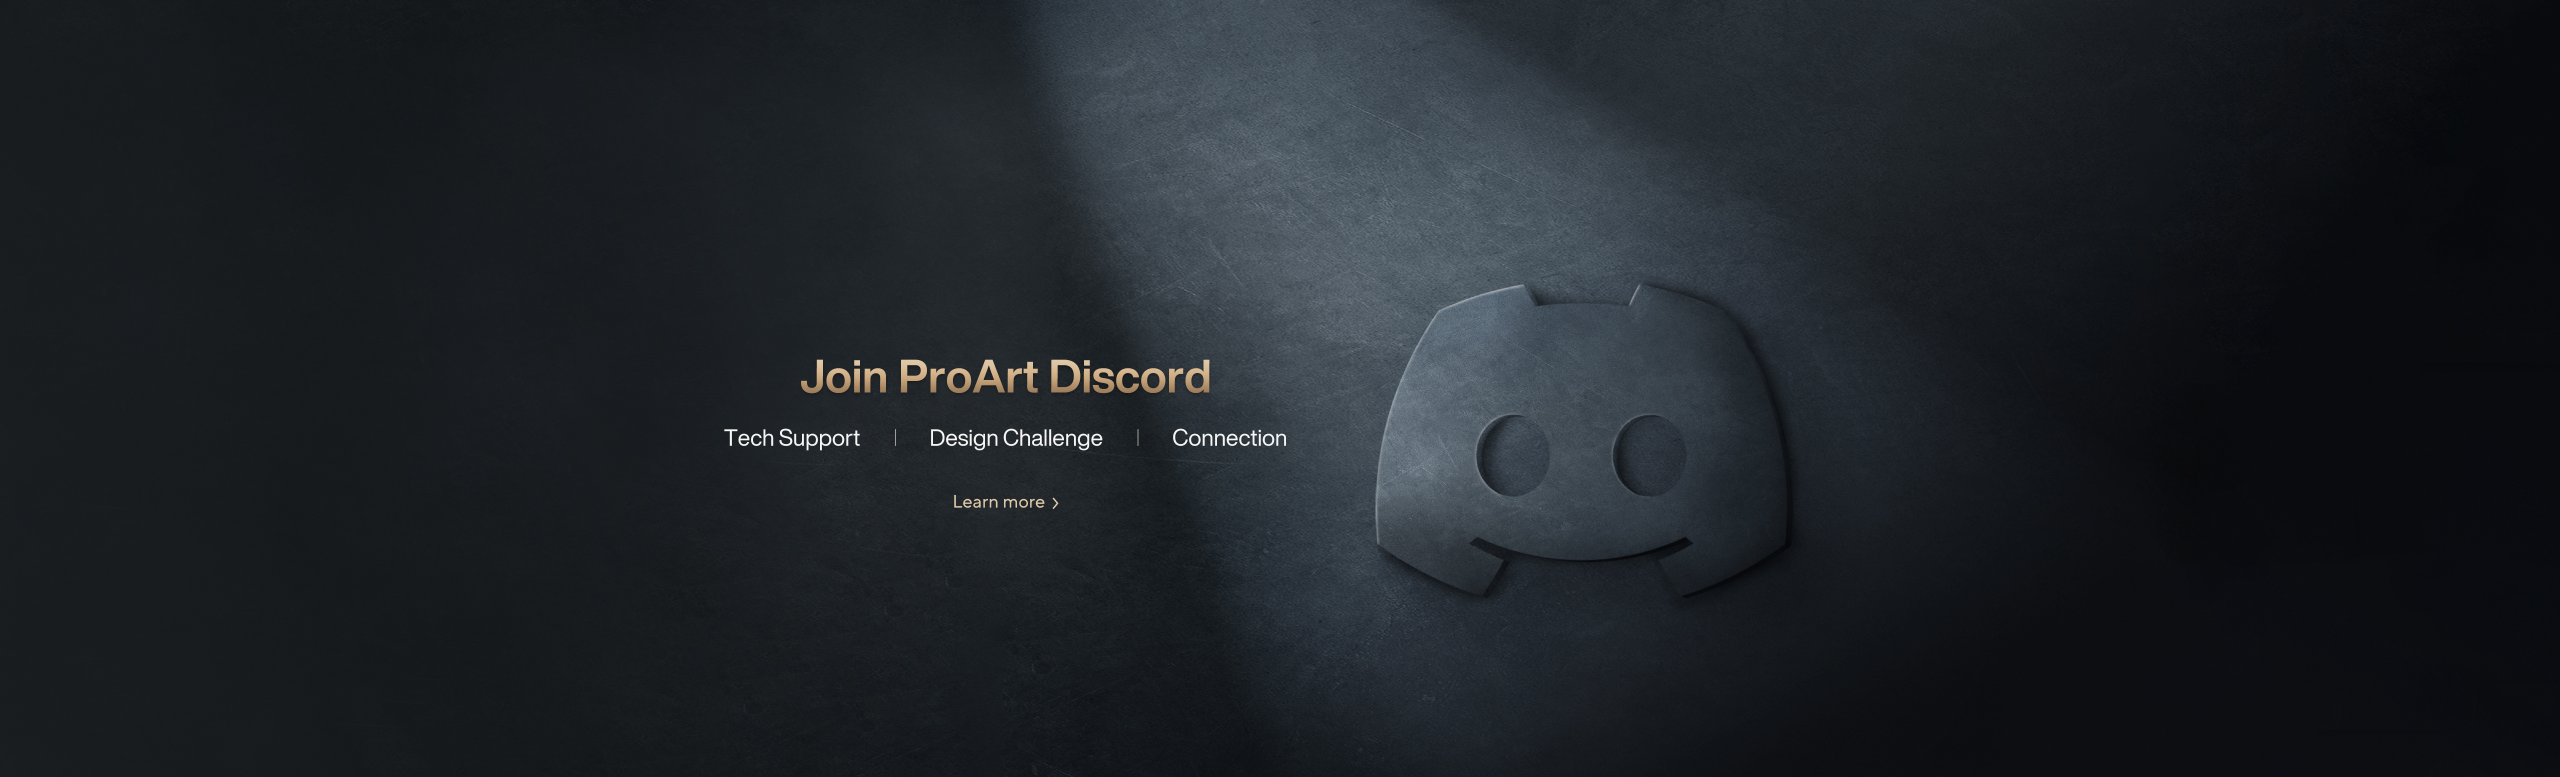 Join ProArt Discord. Tech Support, Connectio, Design Challenge